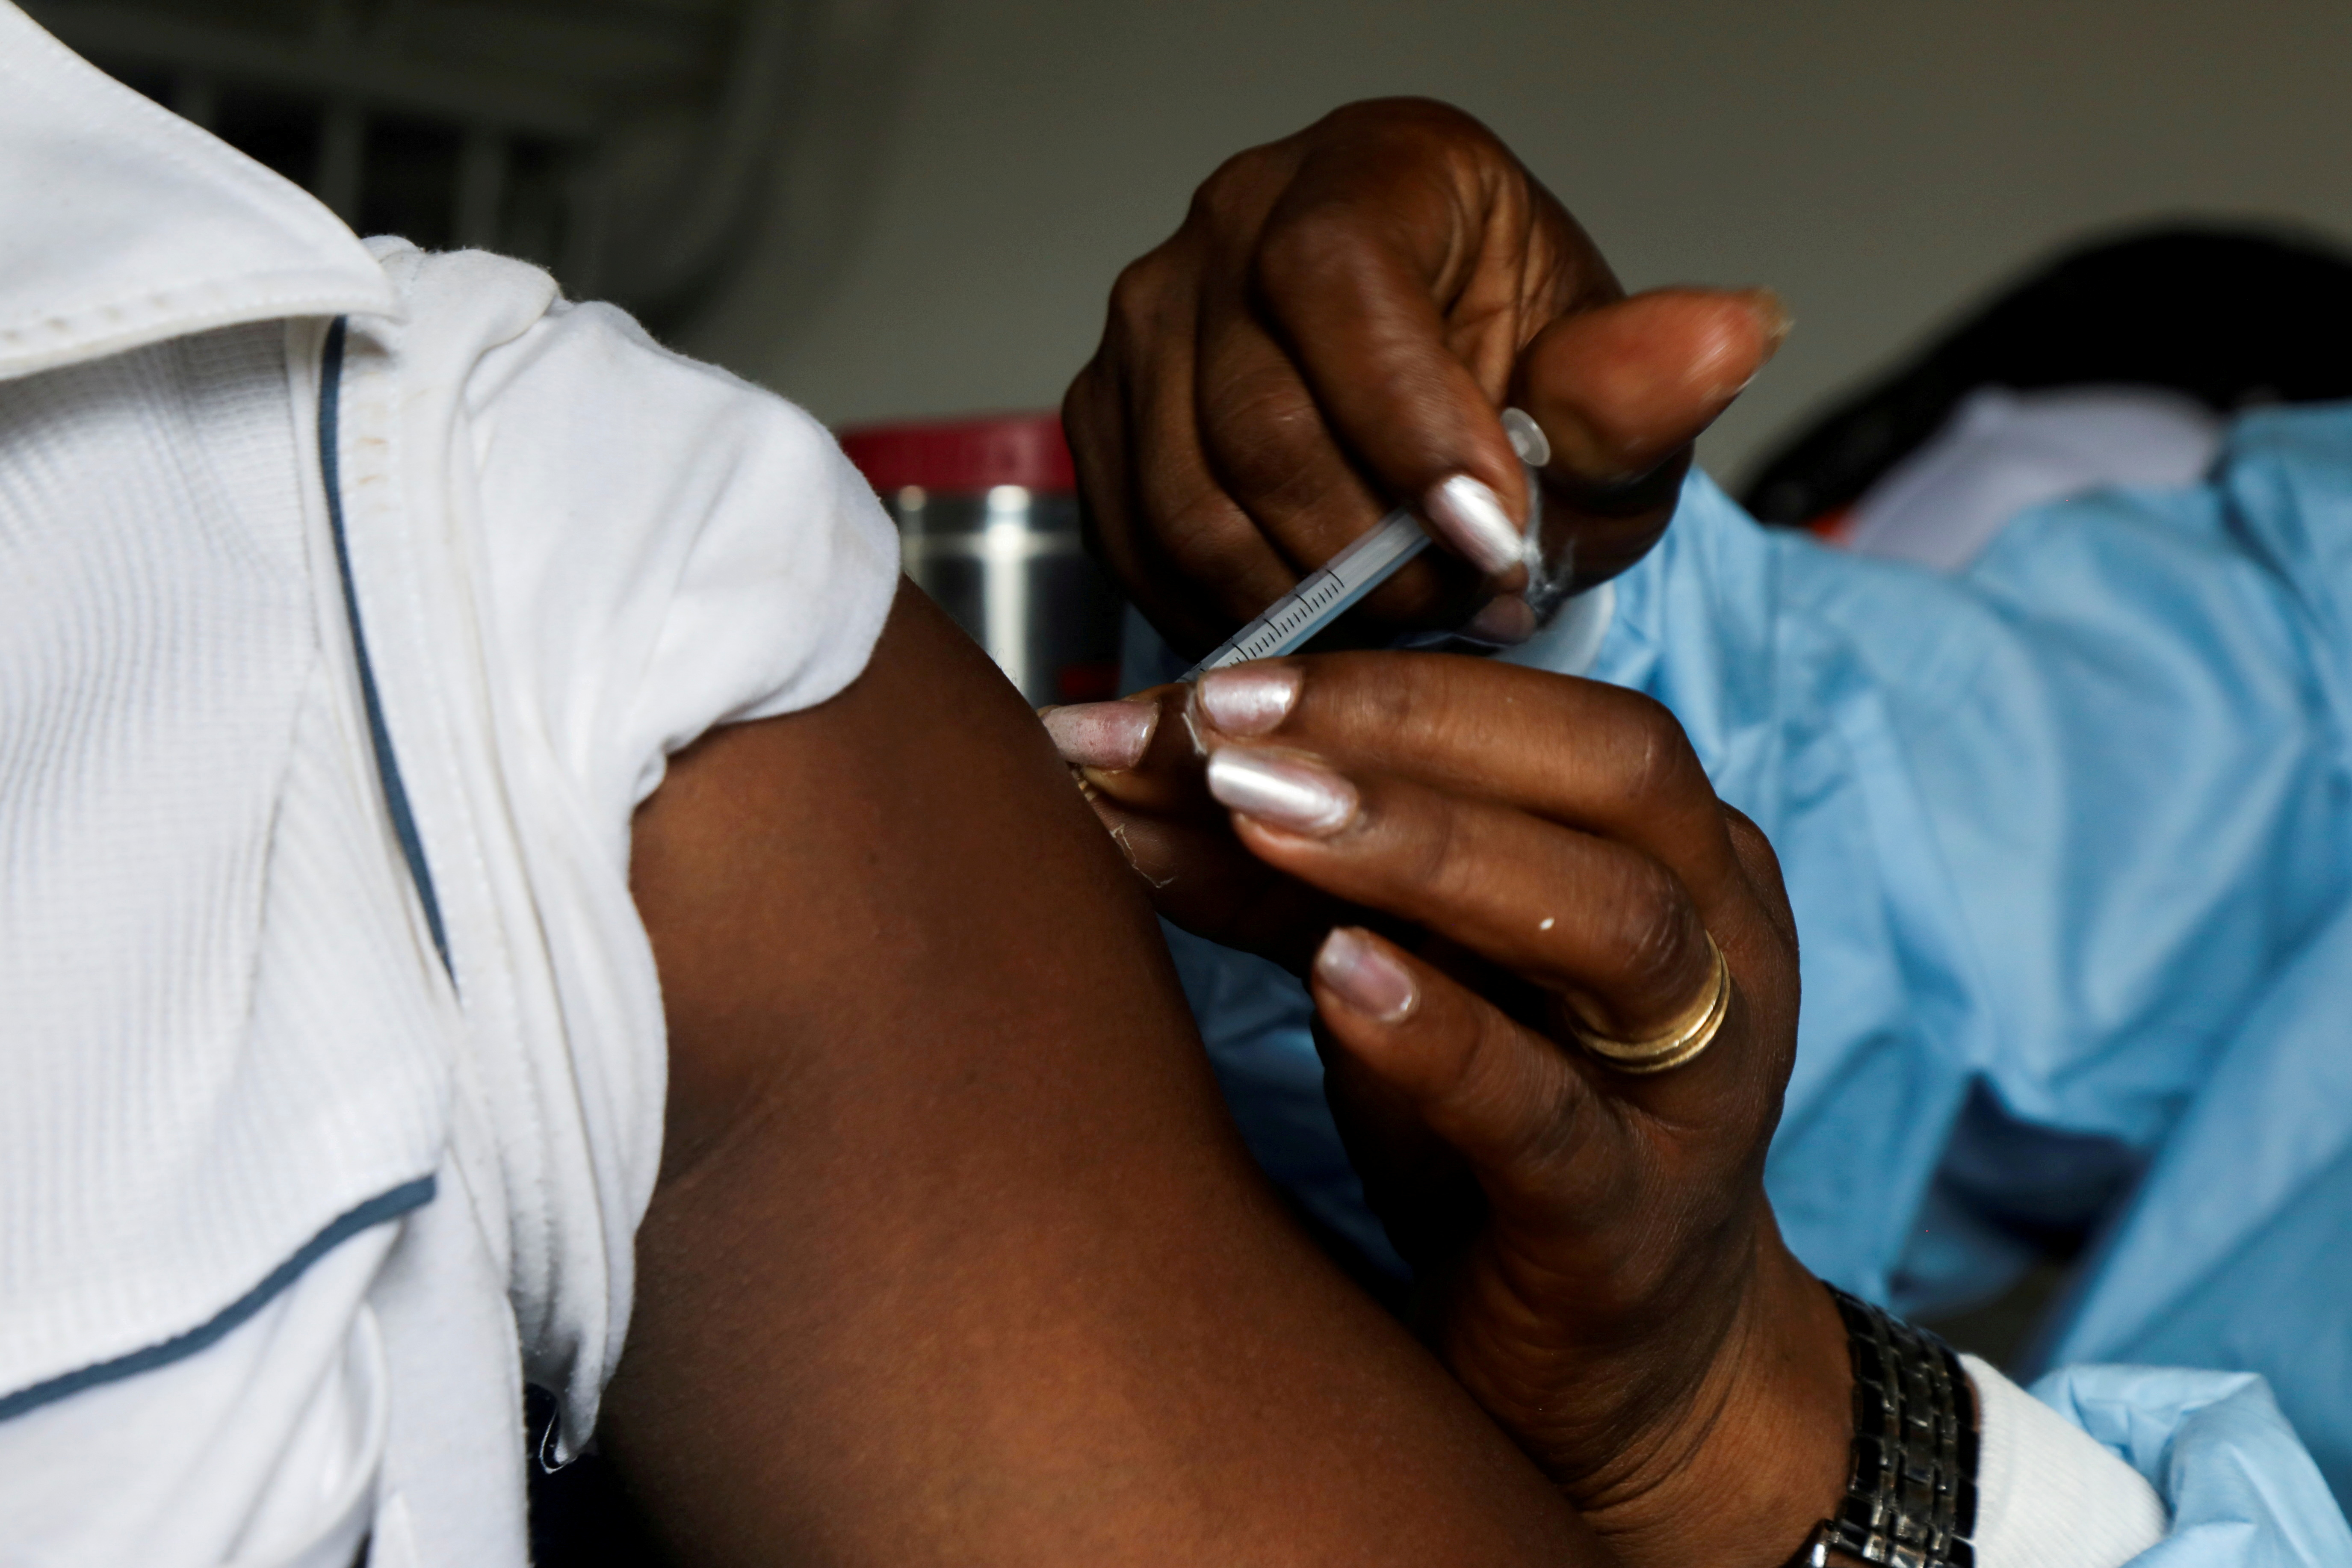   A man receives a vaccine against the coronavirus disease (COVID-19) in a vaccination truck at a mobile vaccination center in Abidjan, Ivory Coast September 23, 2021. REUTERS/Luc Gnago/File Photo